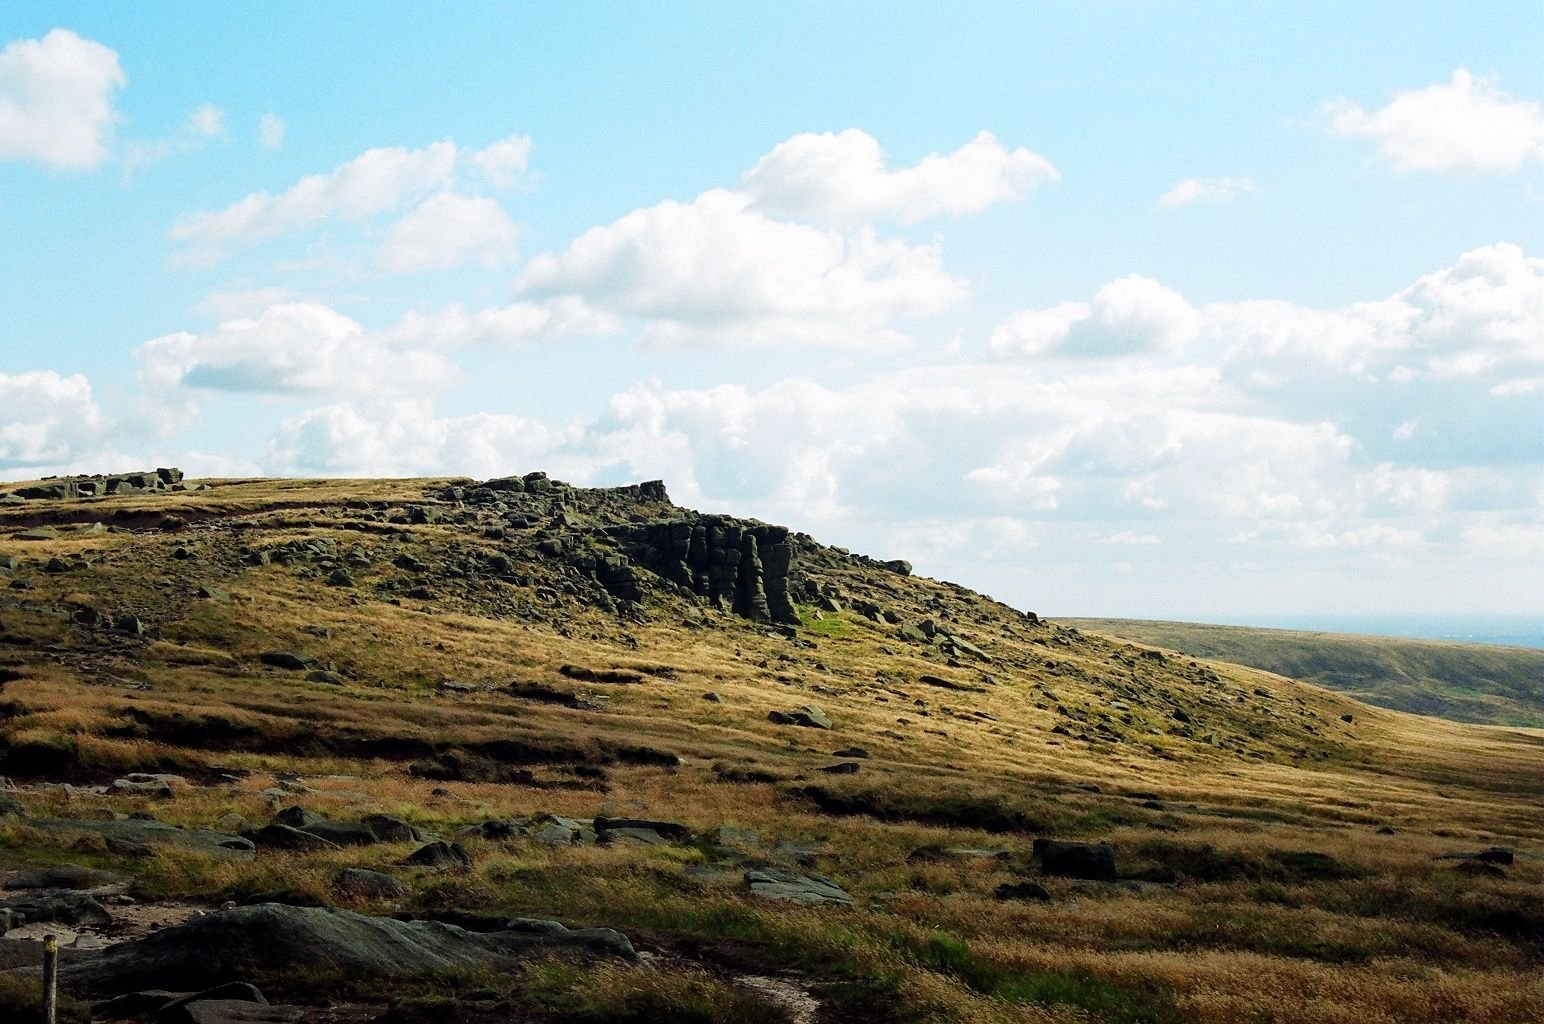 Explore the Top 10 Attractions and Activities in the South Pennines